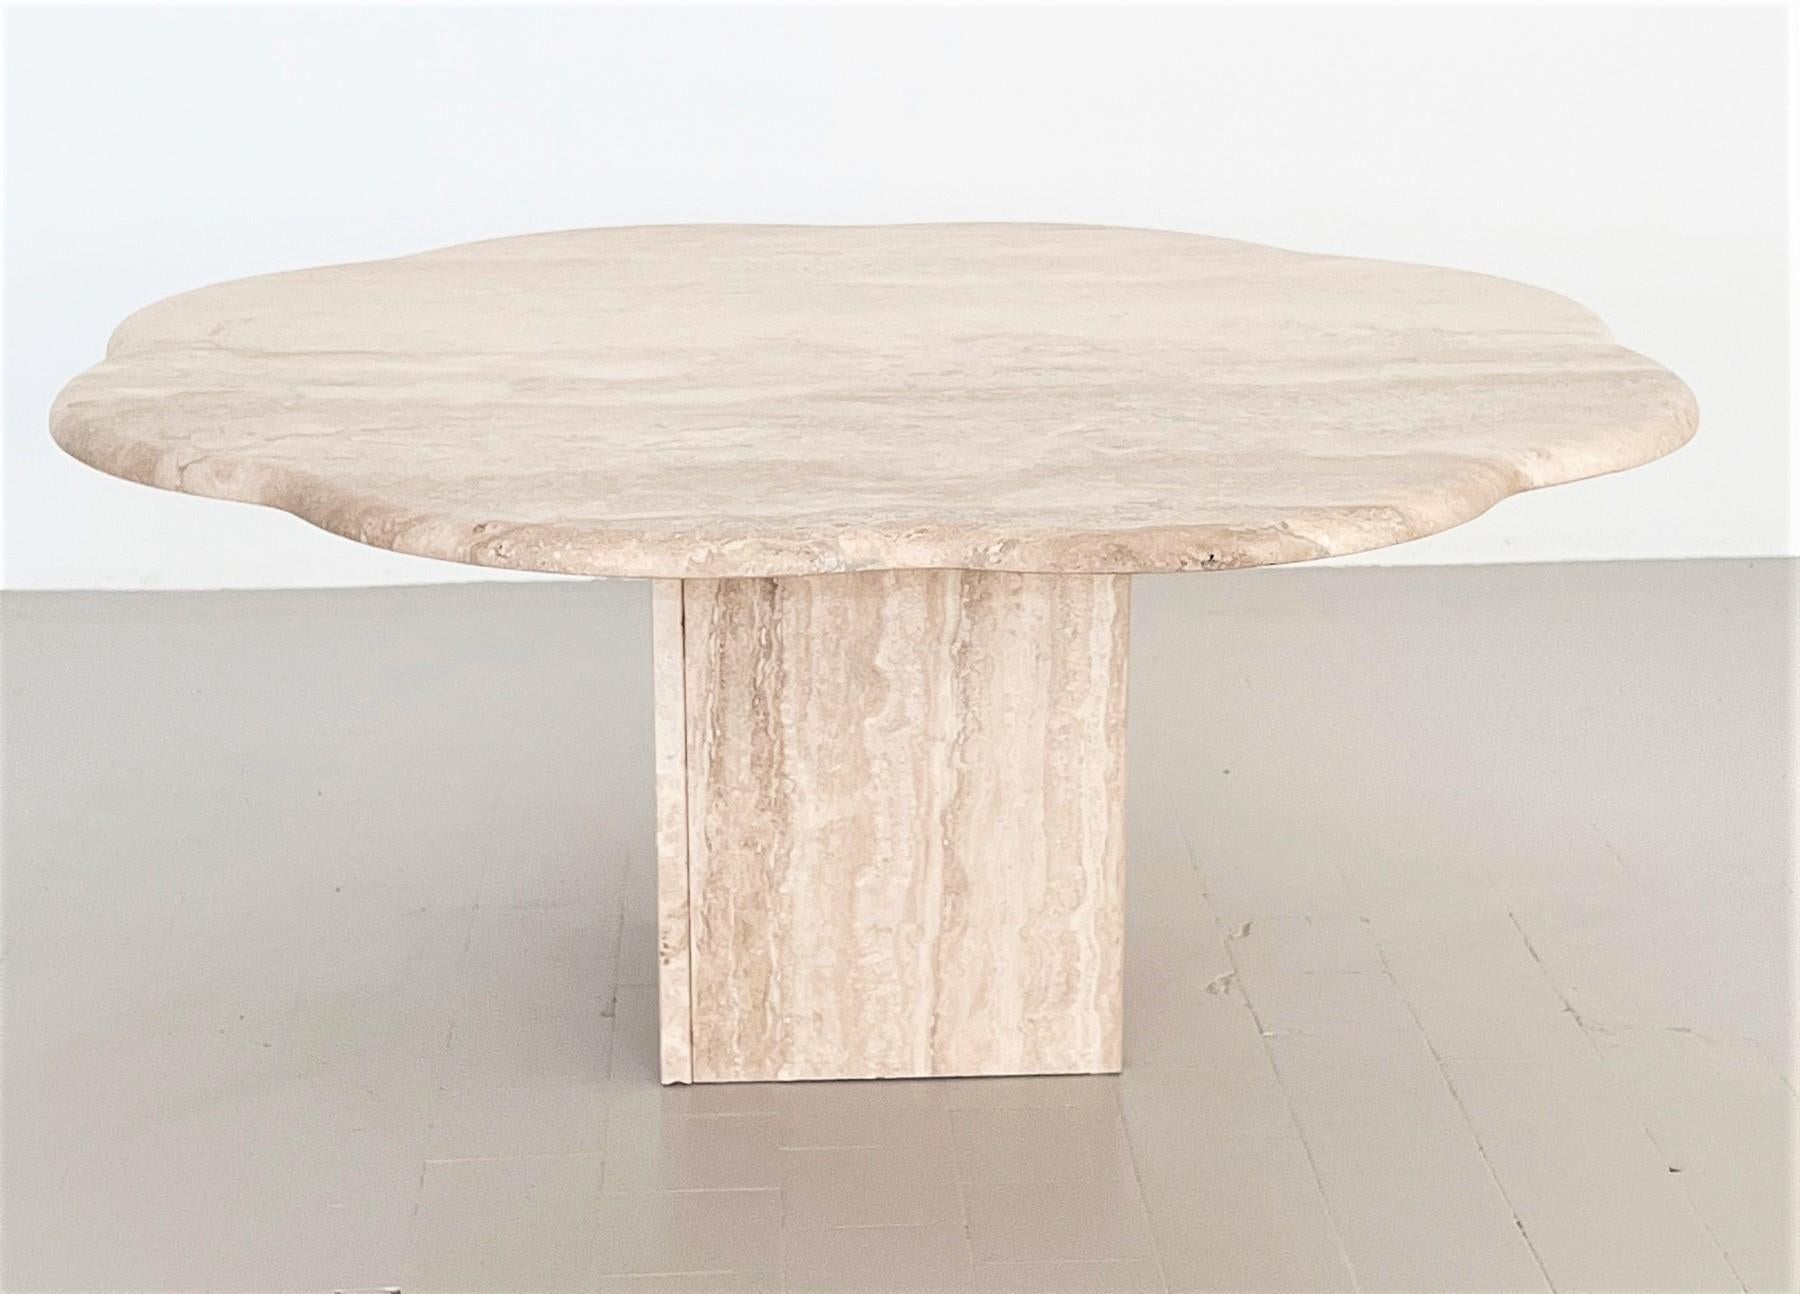 Hand-Crafted Italian Midcentury Coffee Table Flower Shape in Travertine Stone, 1970s